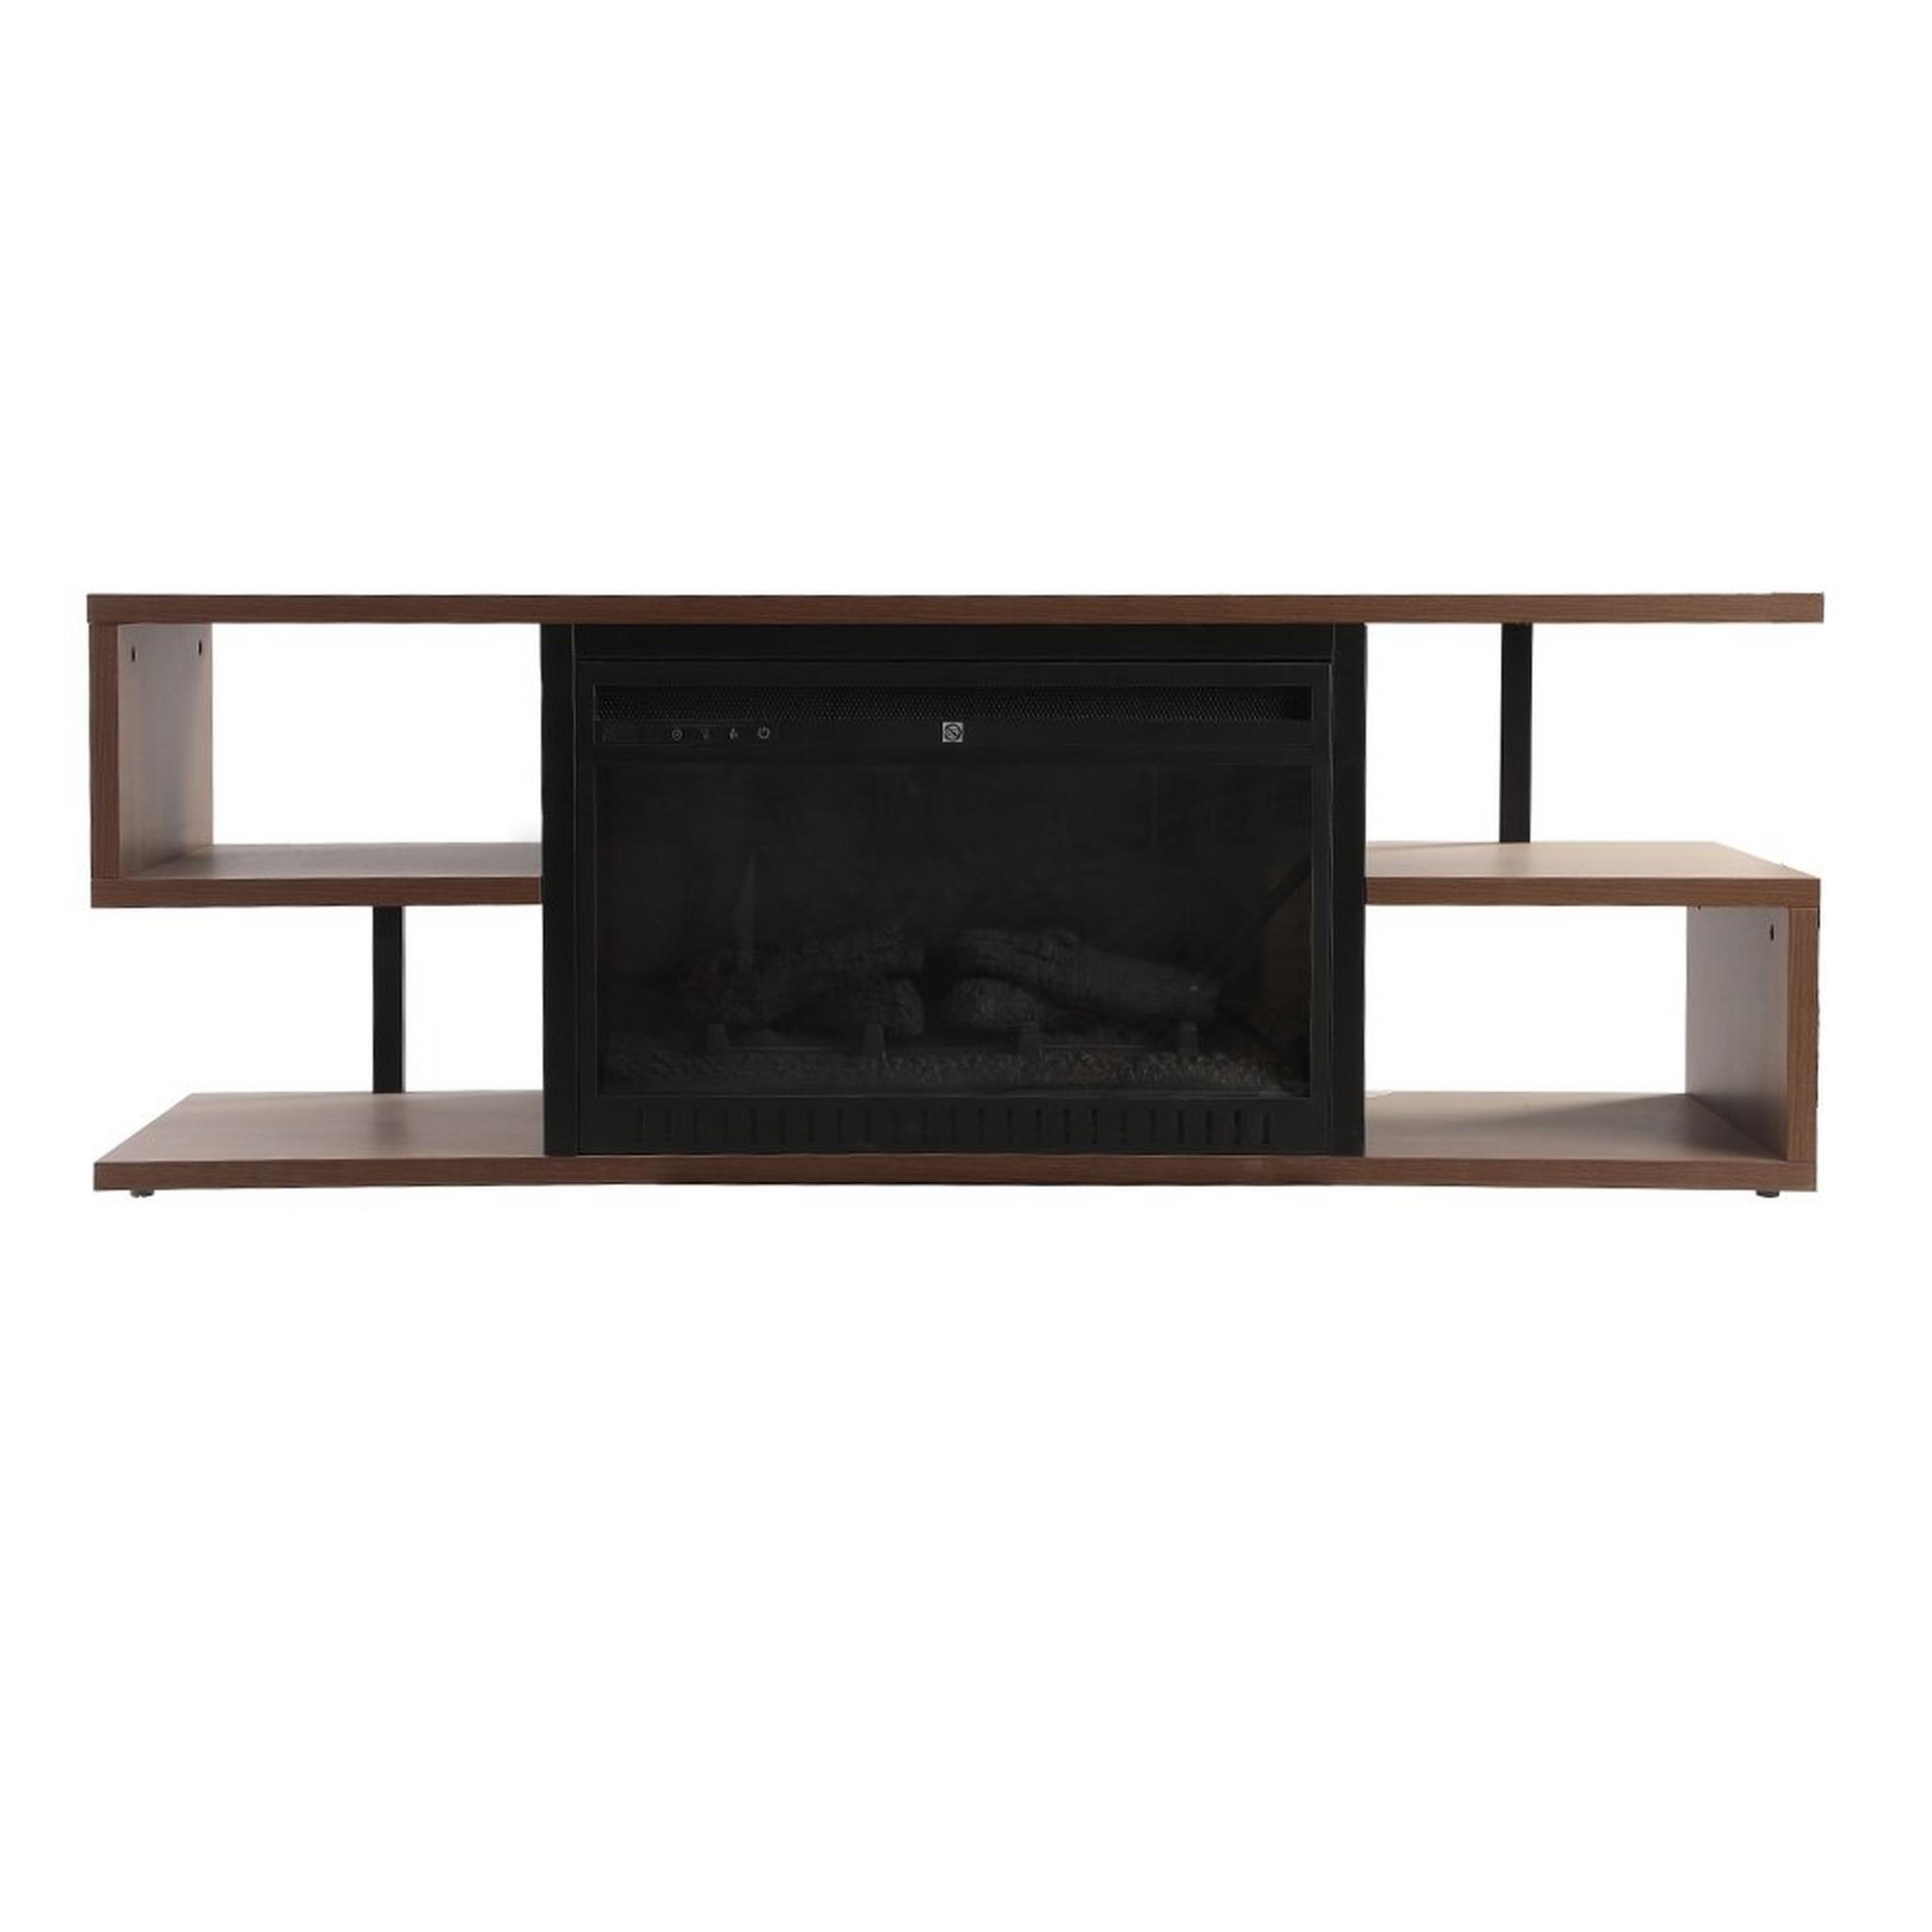 Wansa TV Stand with Fireplace, Up To 55-Inch, 60 Kg Loading Capacity, A510-8